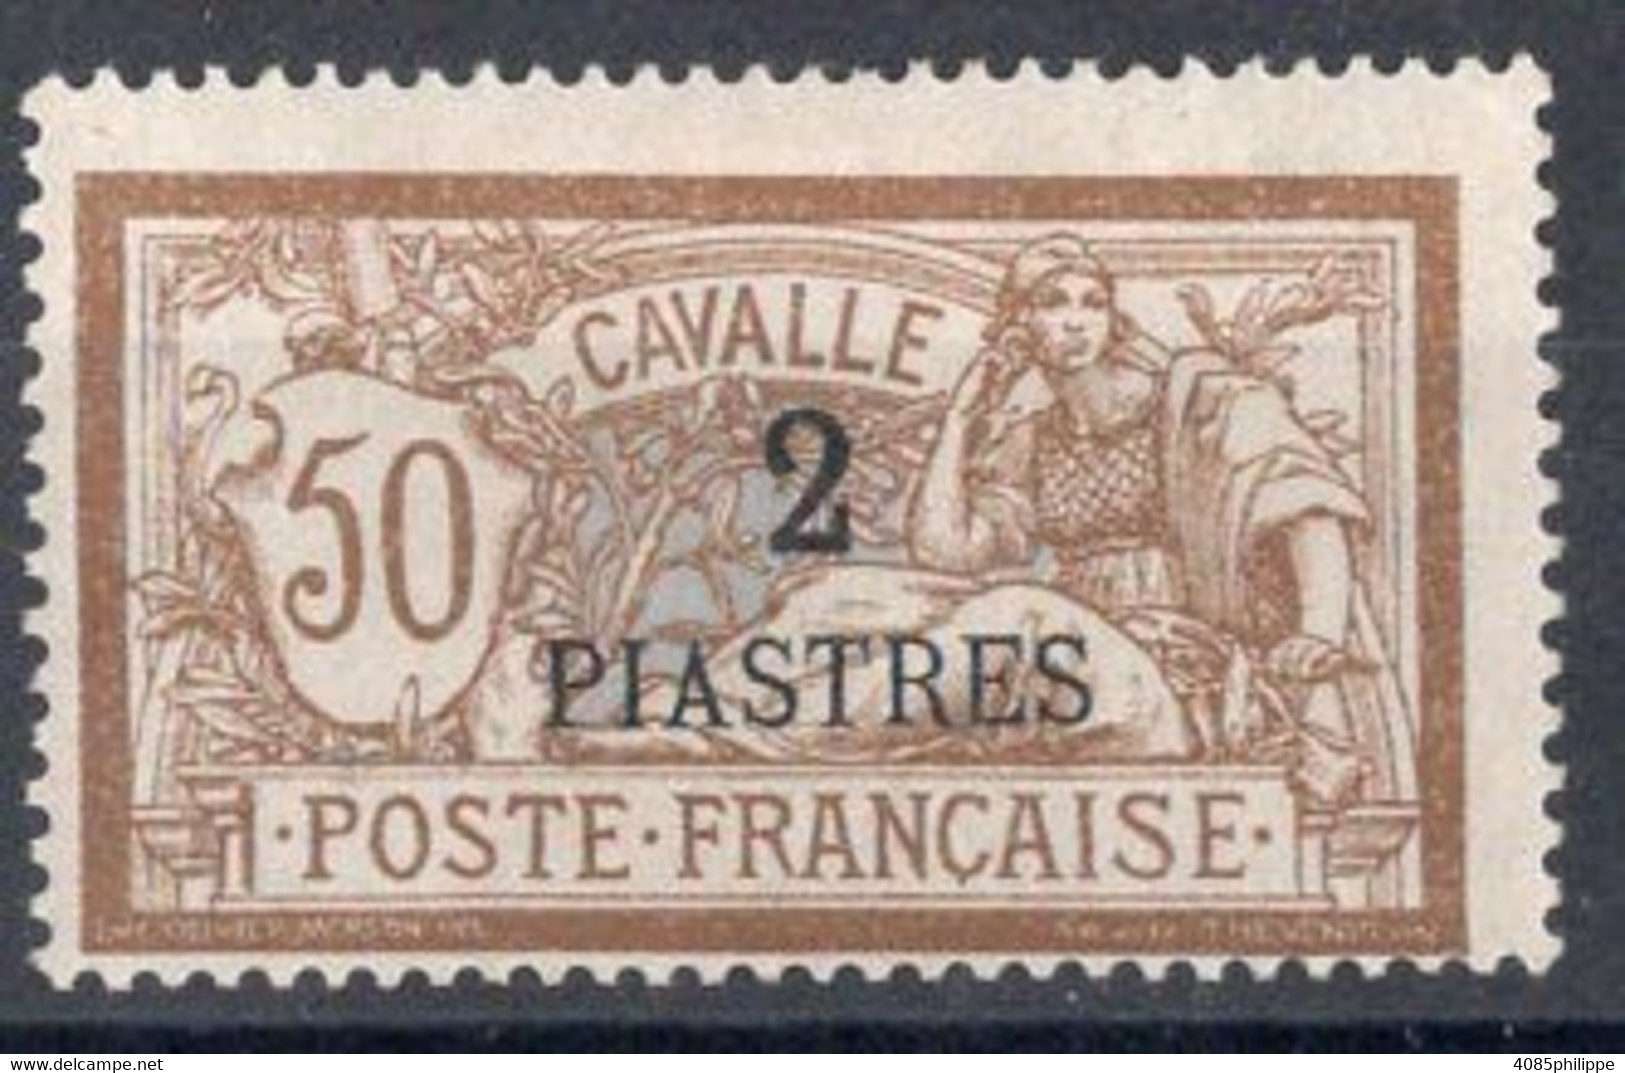 Cavalle Timbre-poste N°14*  Neuf Charnière Cote : 16€00 - Ongebruikt